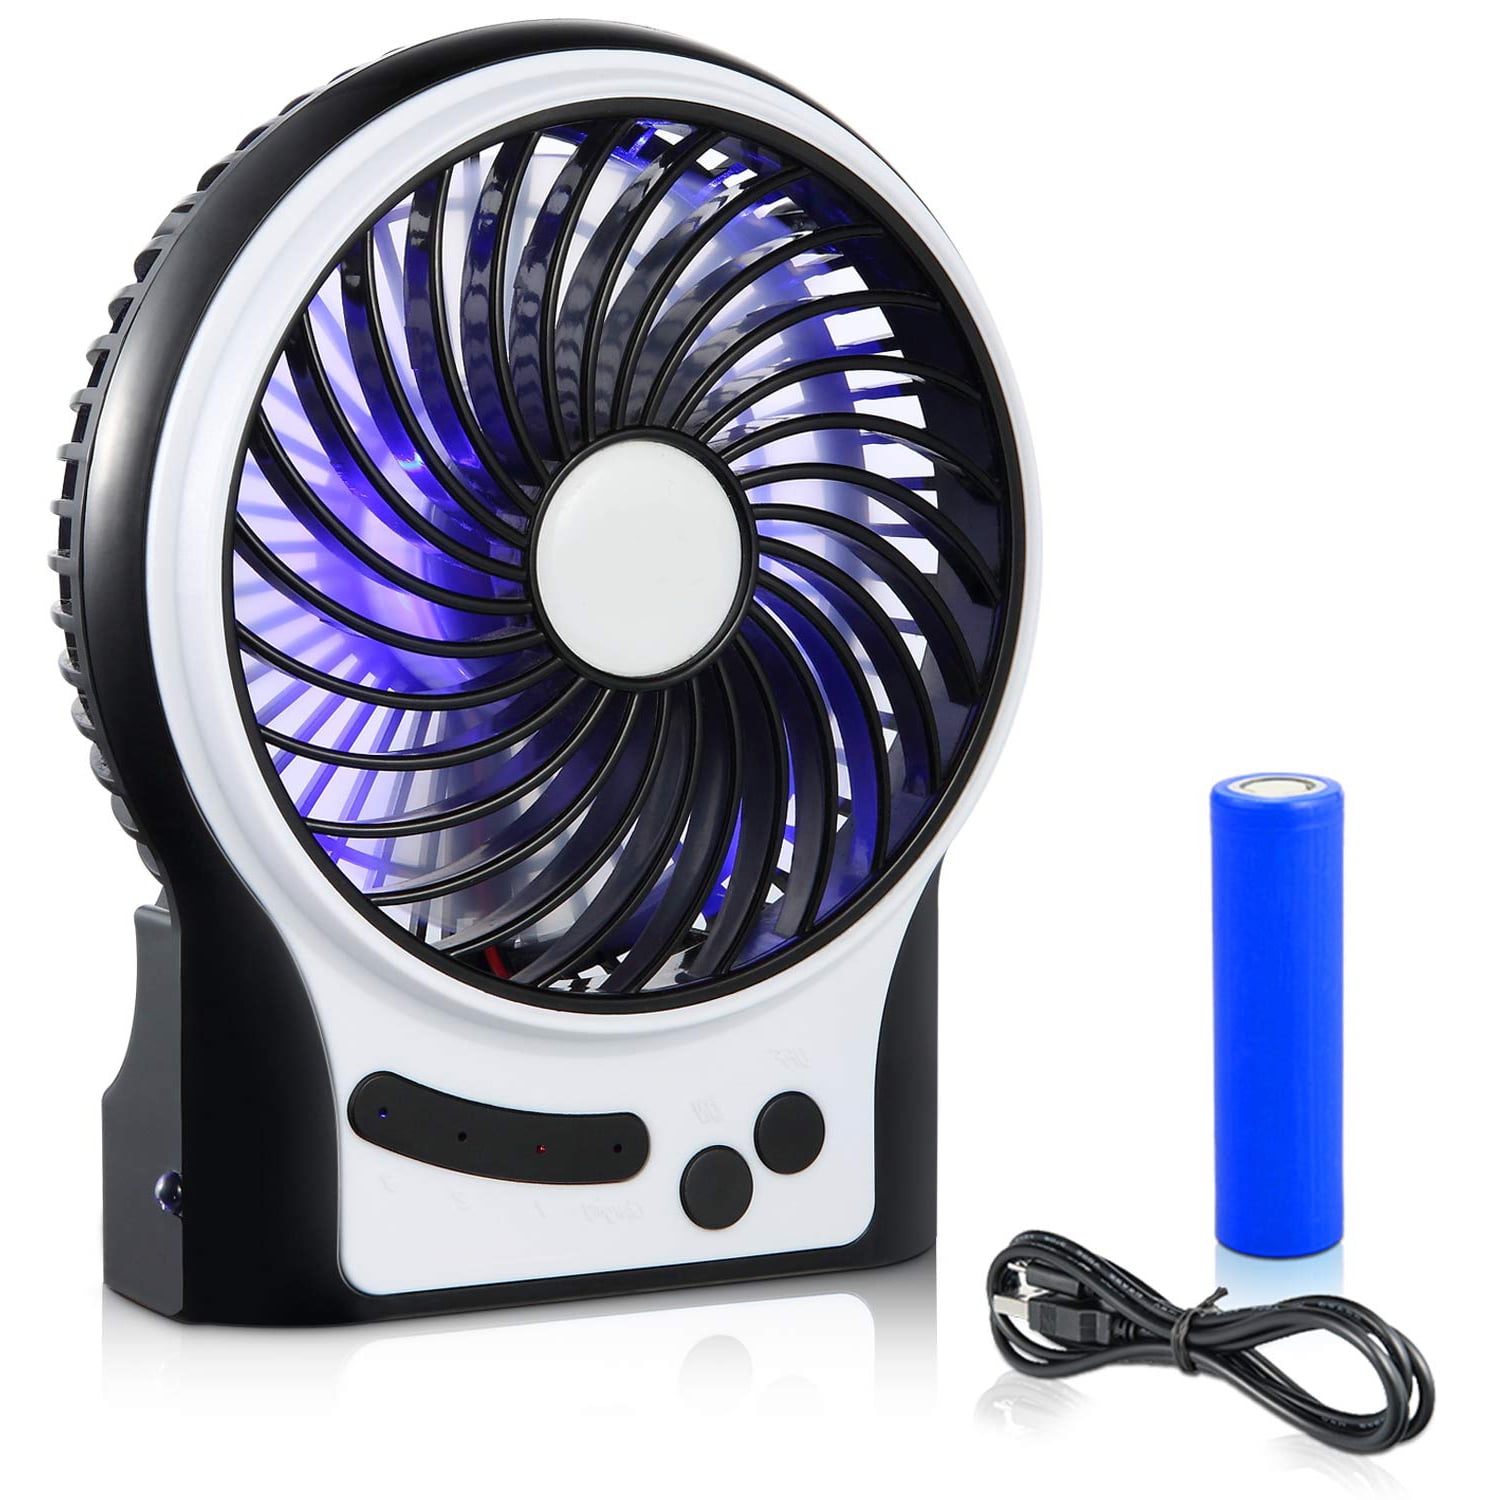 Jajx-comac USB Personal Desk Fan Portable Powered Small Desk Fan USB Rechargable Portable Table Fan with 1800mAh Battery & A USB Cable for Home Office Table Color : Yellow, Size : Free Size 